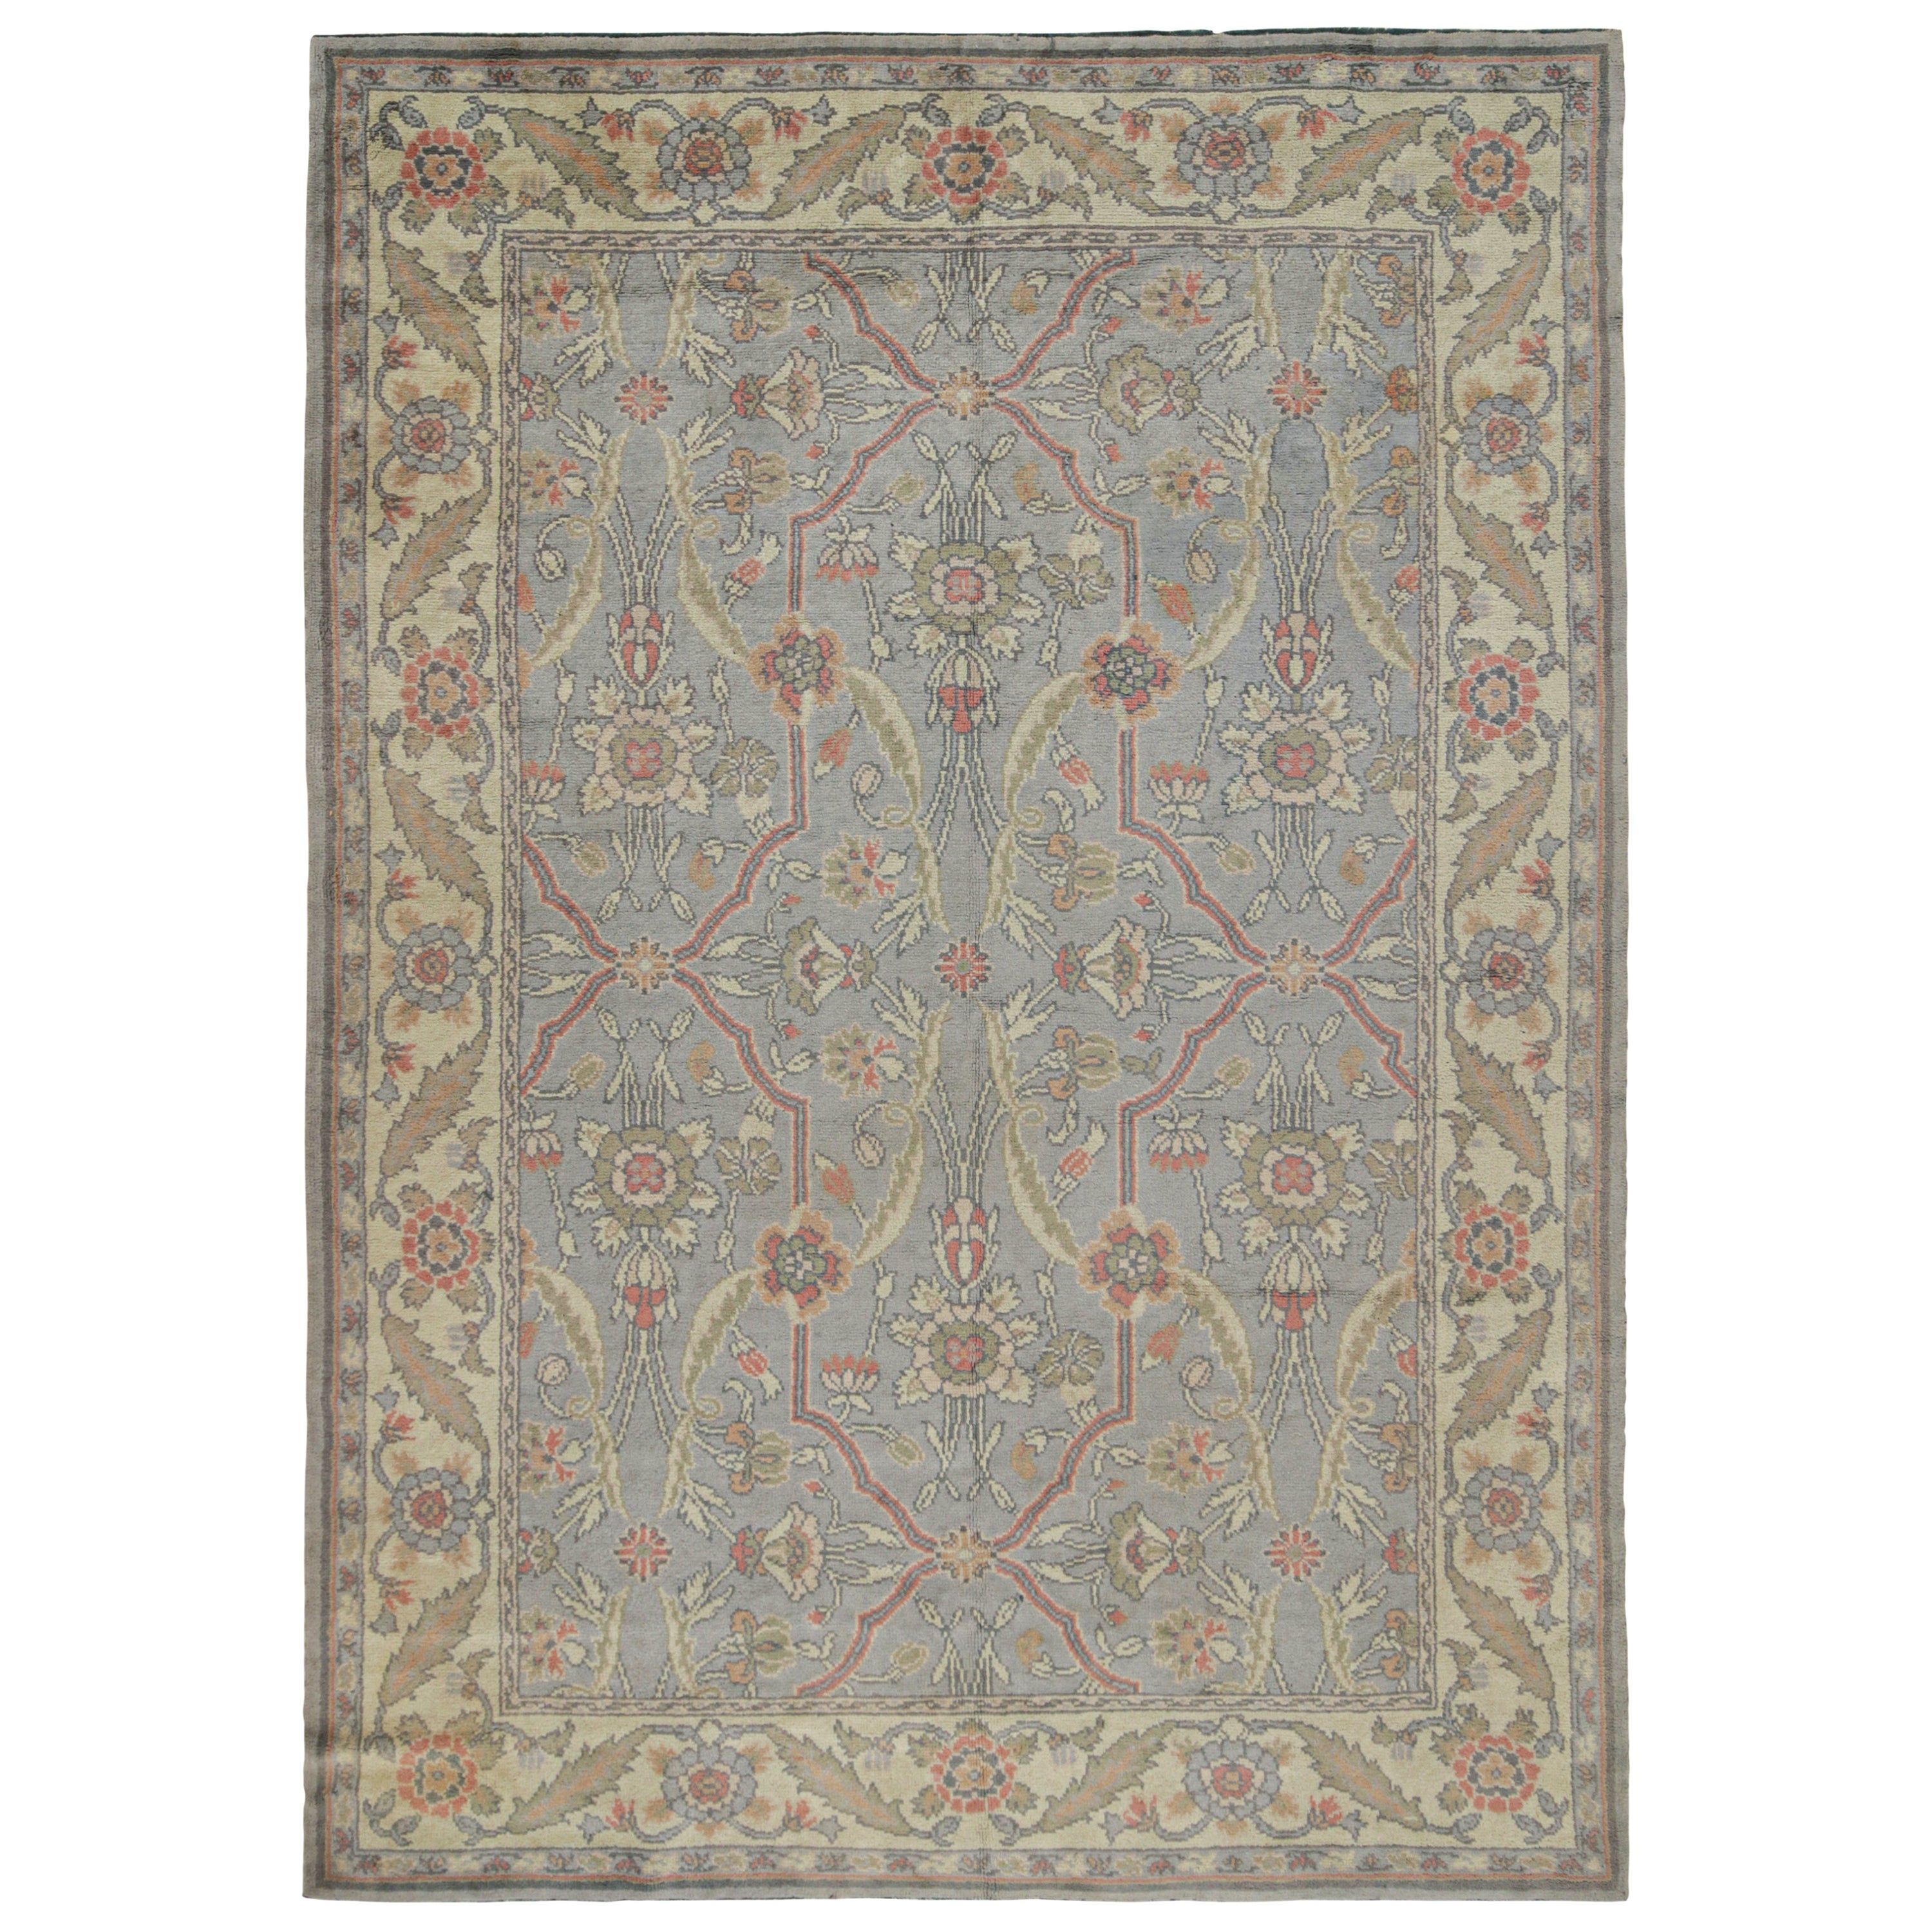 Antique Donegal Arts & Crafts Rug in Blue with Floral Patterns